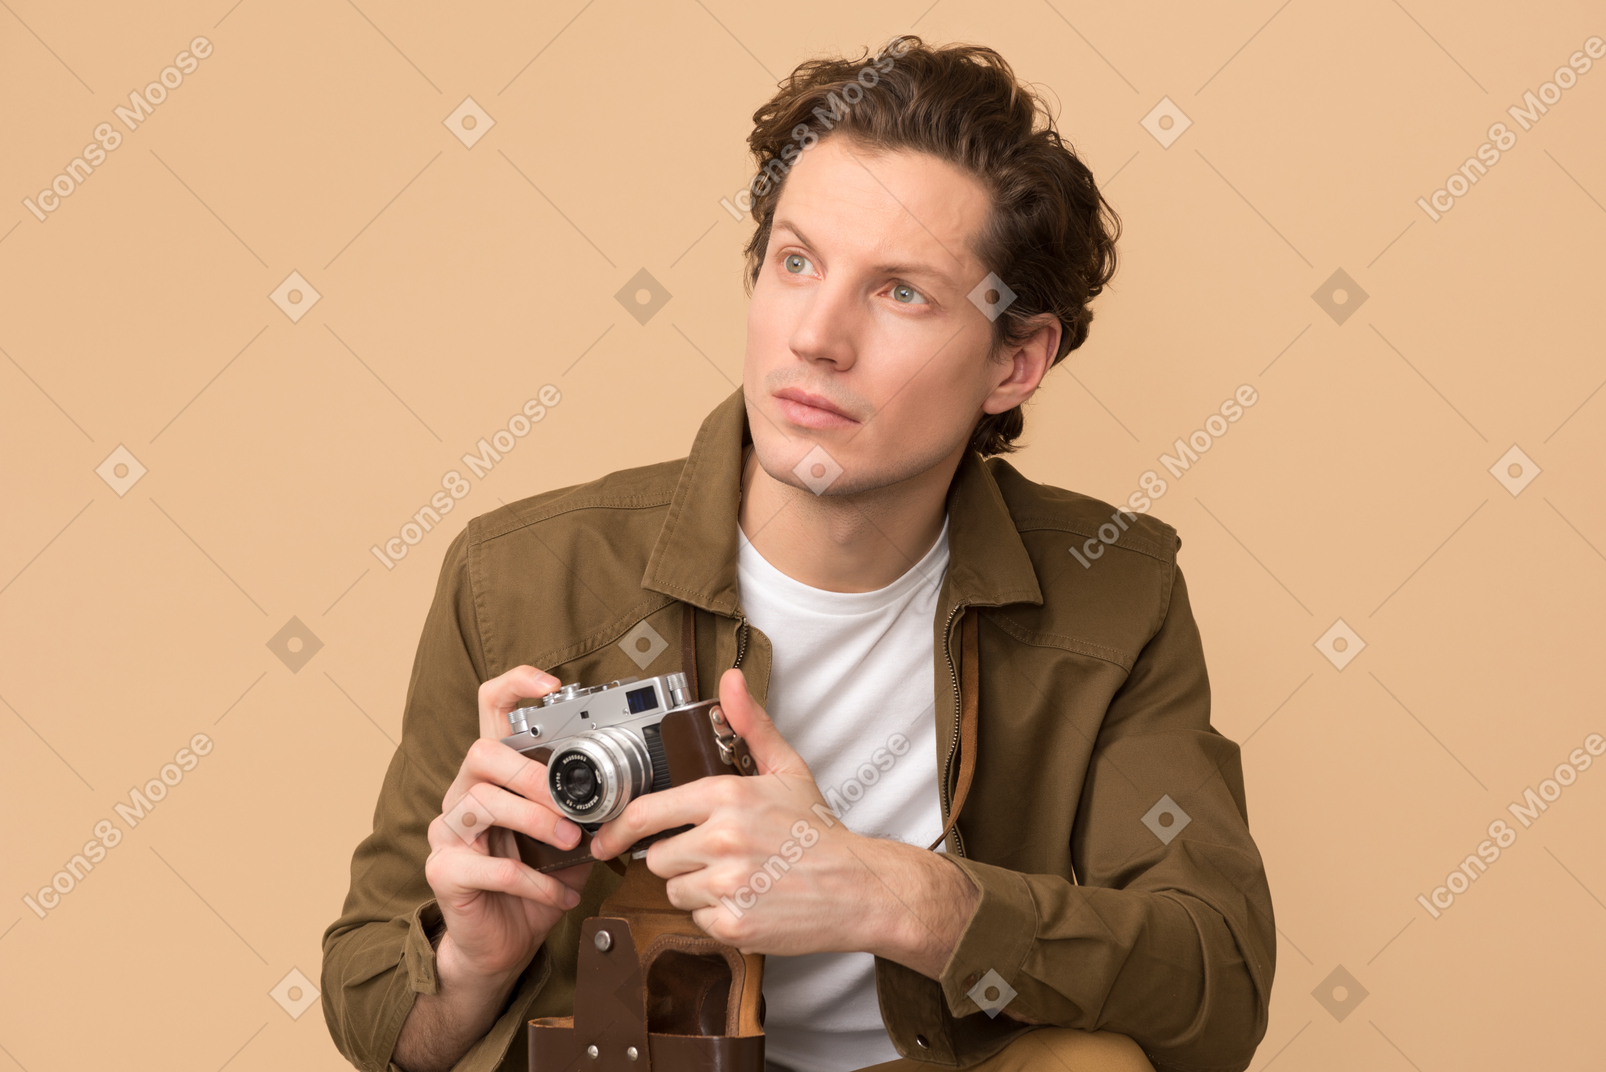 Handsome young man holding a camera